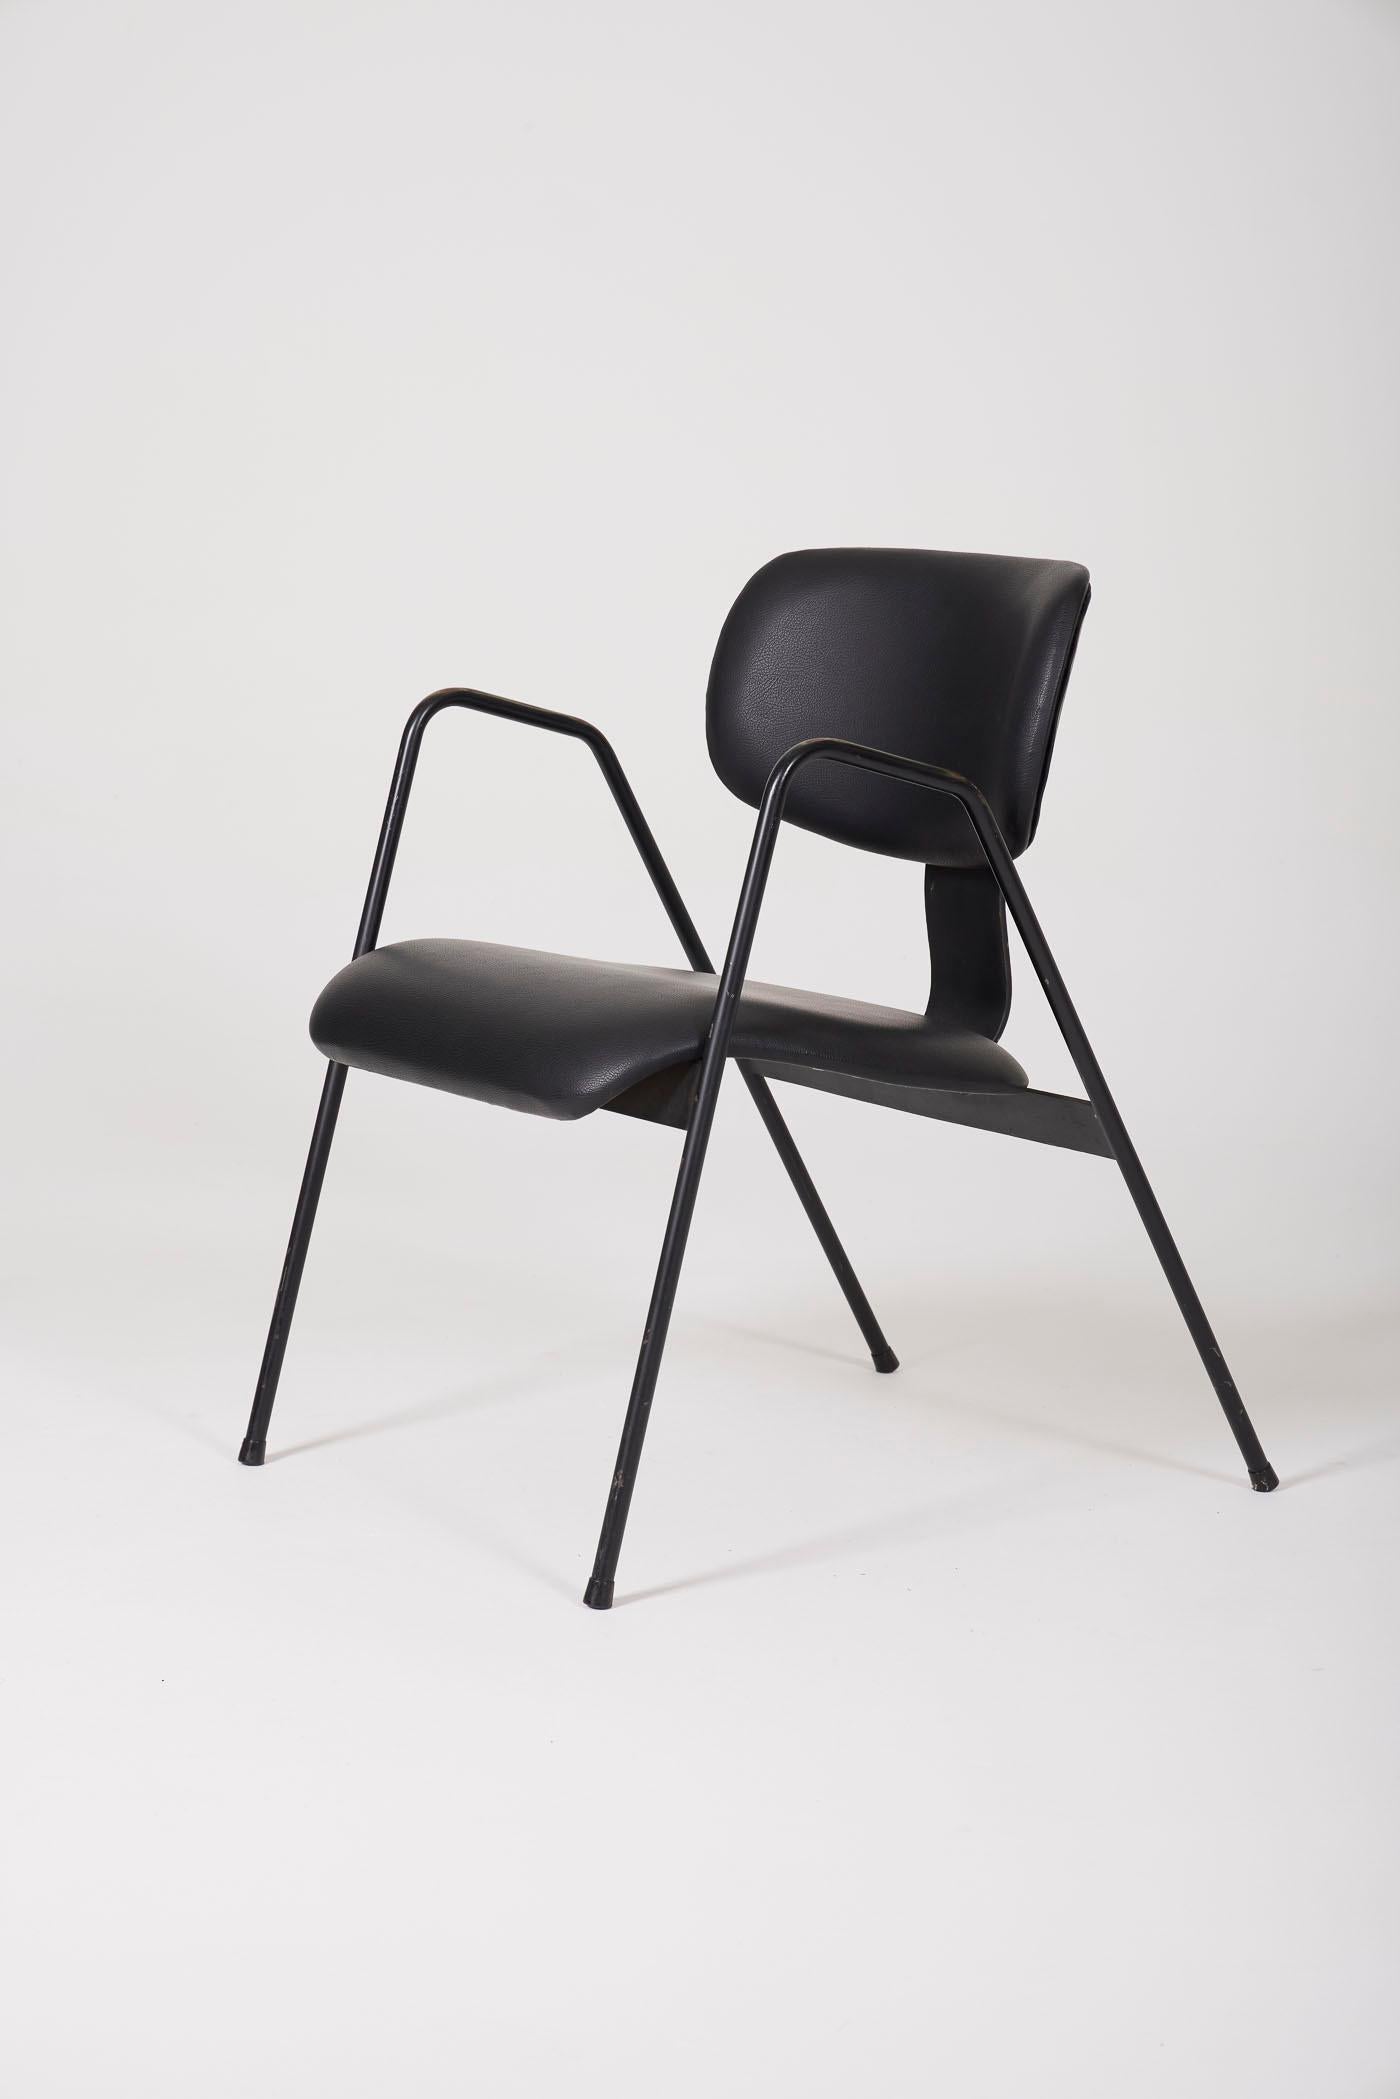 Armchair model F1 by Belgian designer Willy Van Der Meeren for Tubax, 1950s. The seat and back are in black faux leather. The frame is in black lacquered metal. 2 chairs available. In perfect condition.
DV441